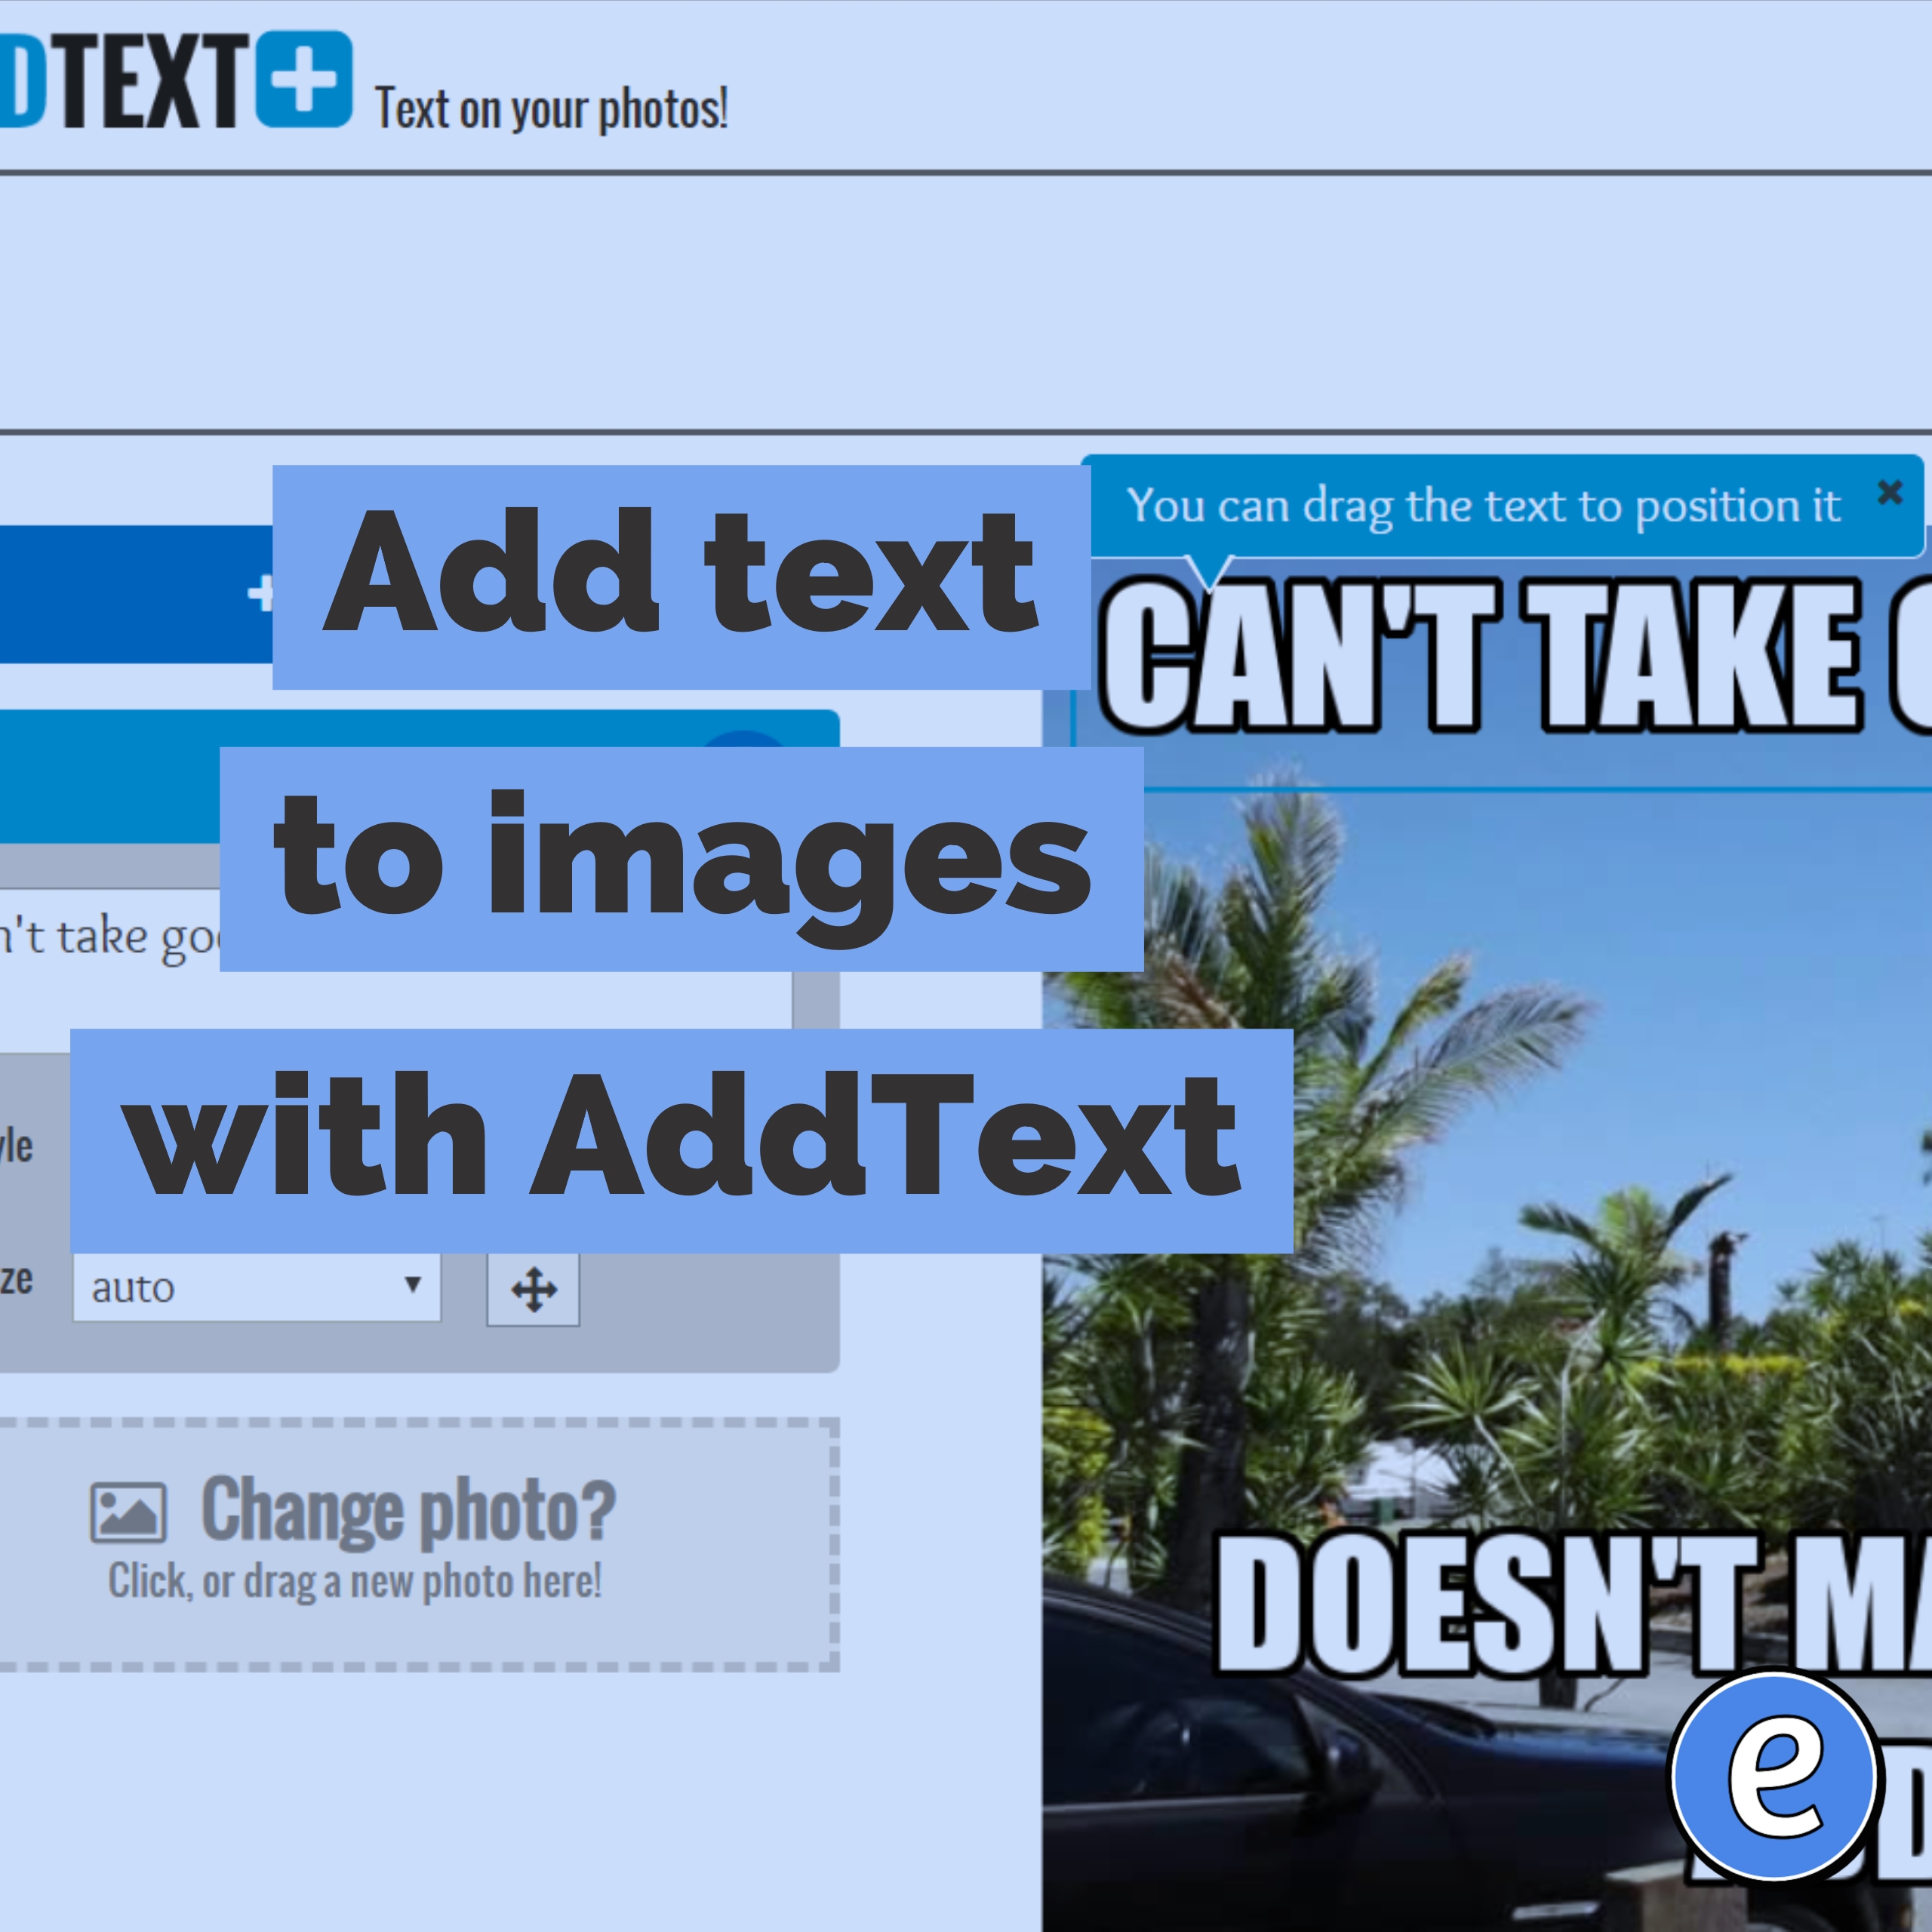 Add text to images with AddText